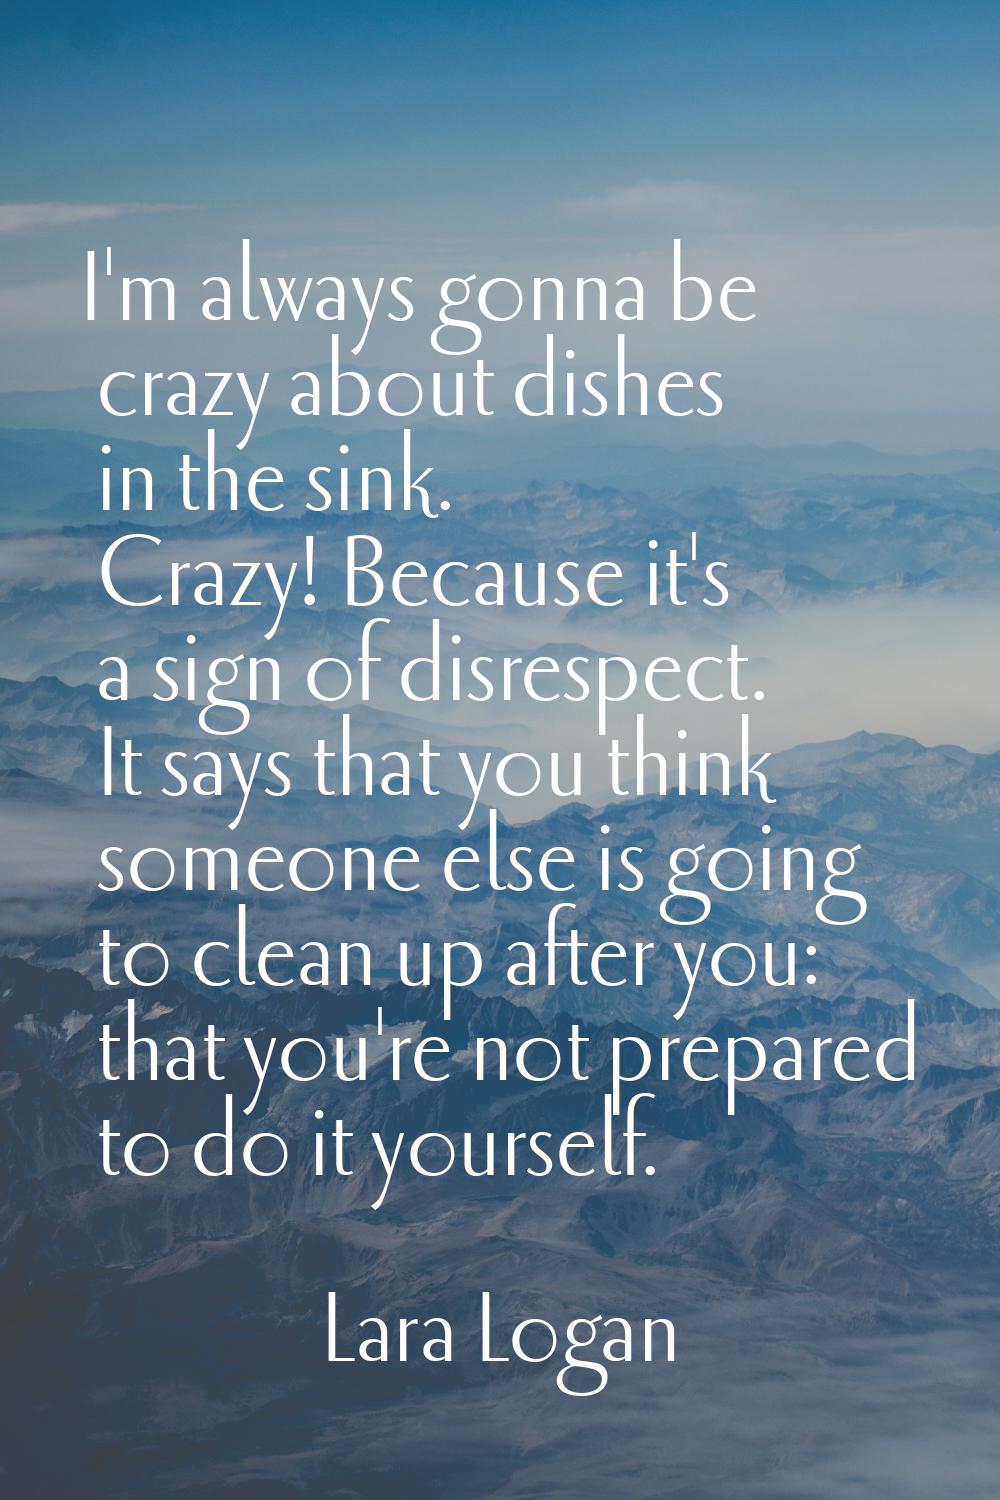 I'm always gonna be crazy about dishes in the sink. Crazy! Because it's a sign of disrespect. It sa